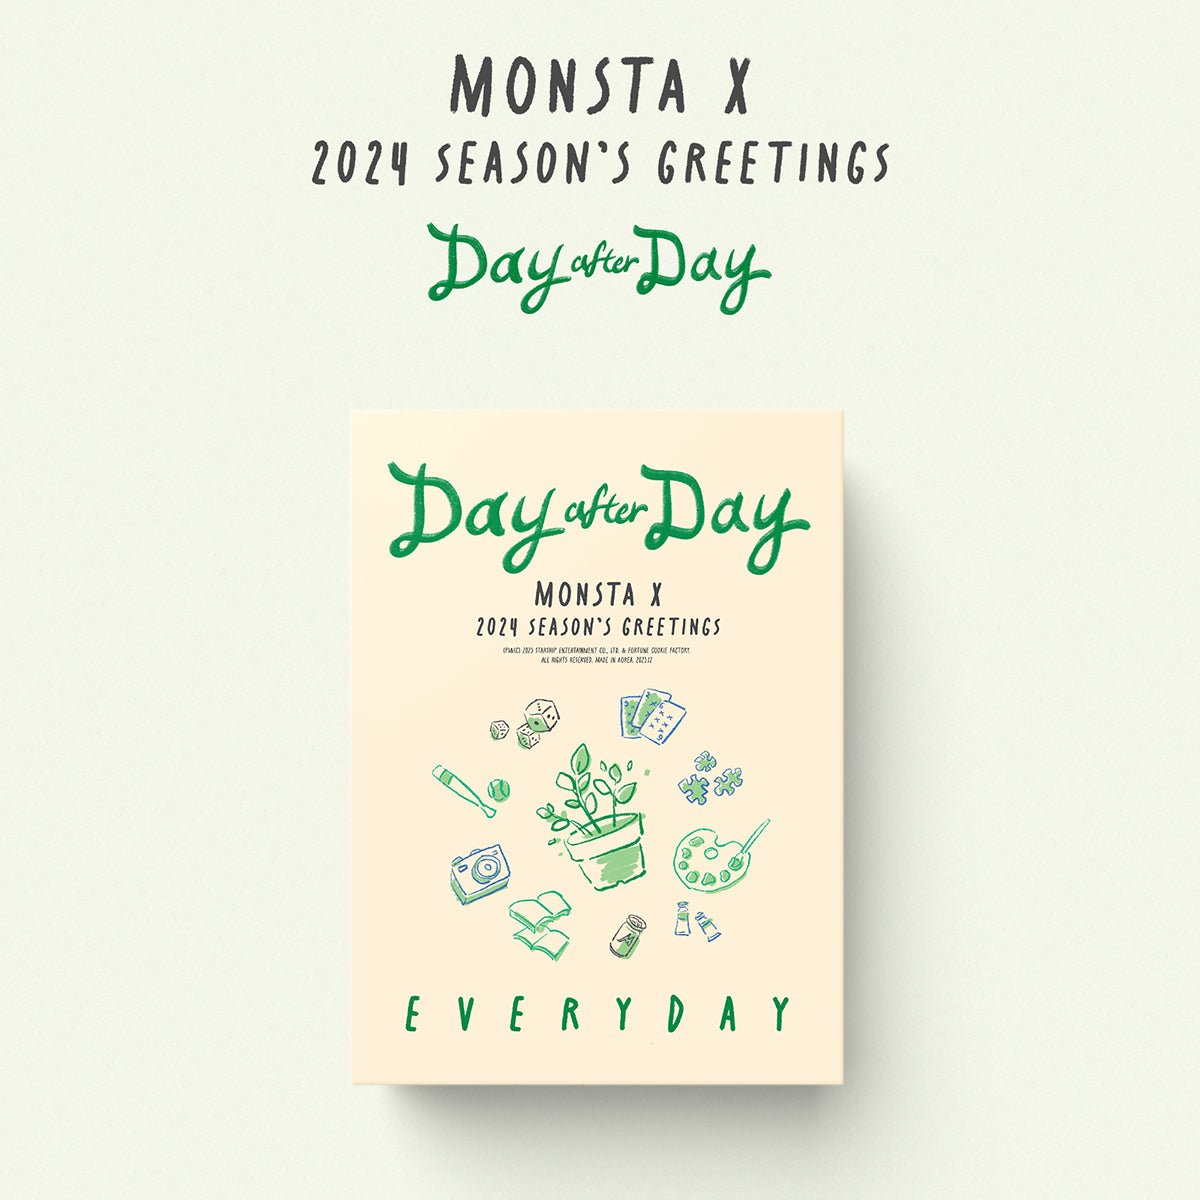 MONSTA X - 2024 SEASON'S GREETINGS [Day after Day] (EVERYDAY ver.)